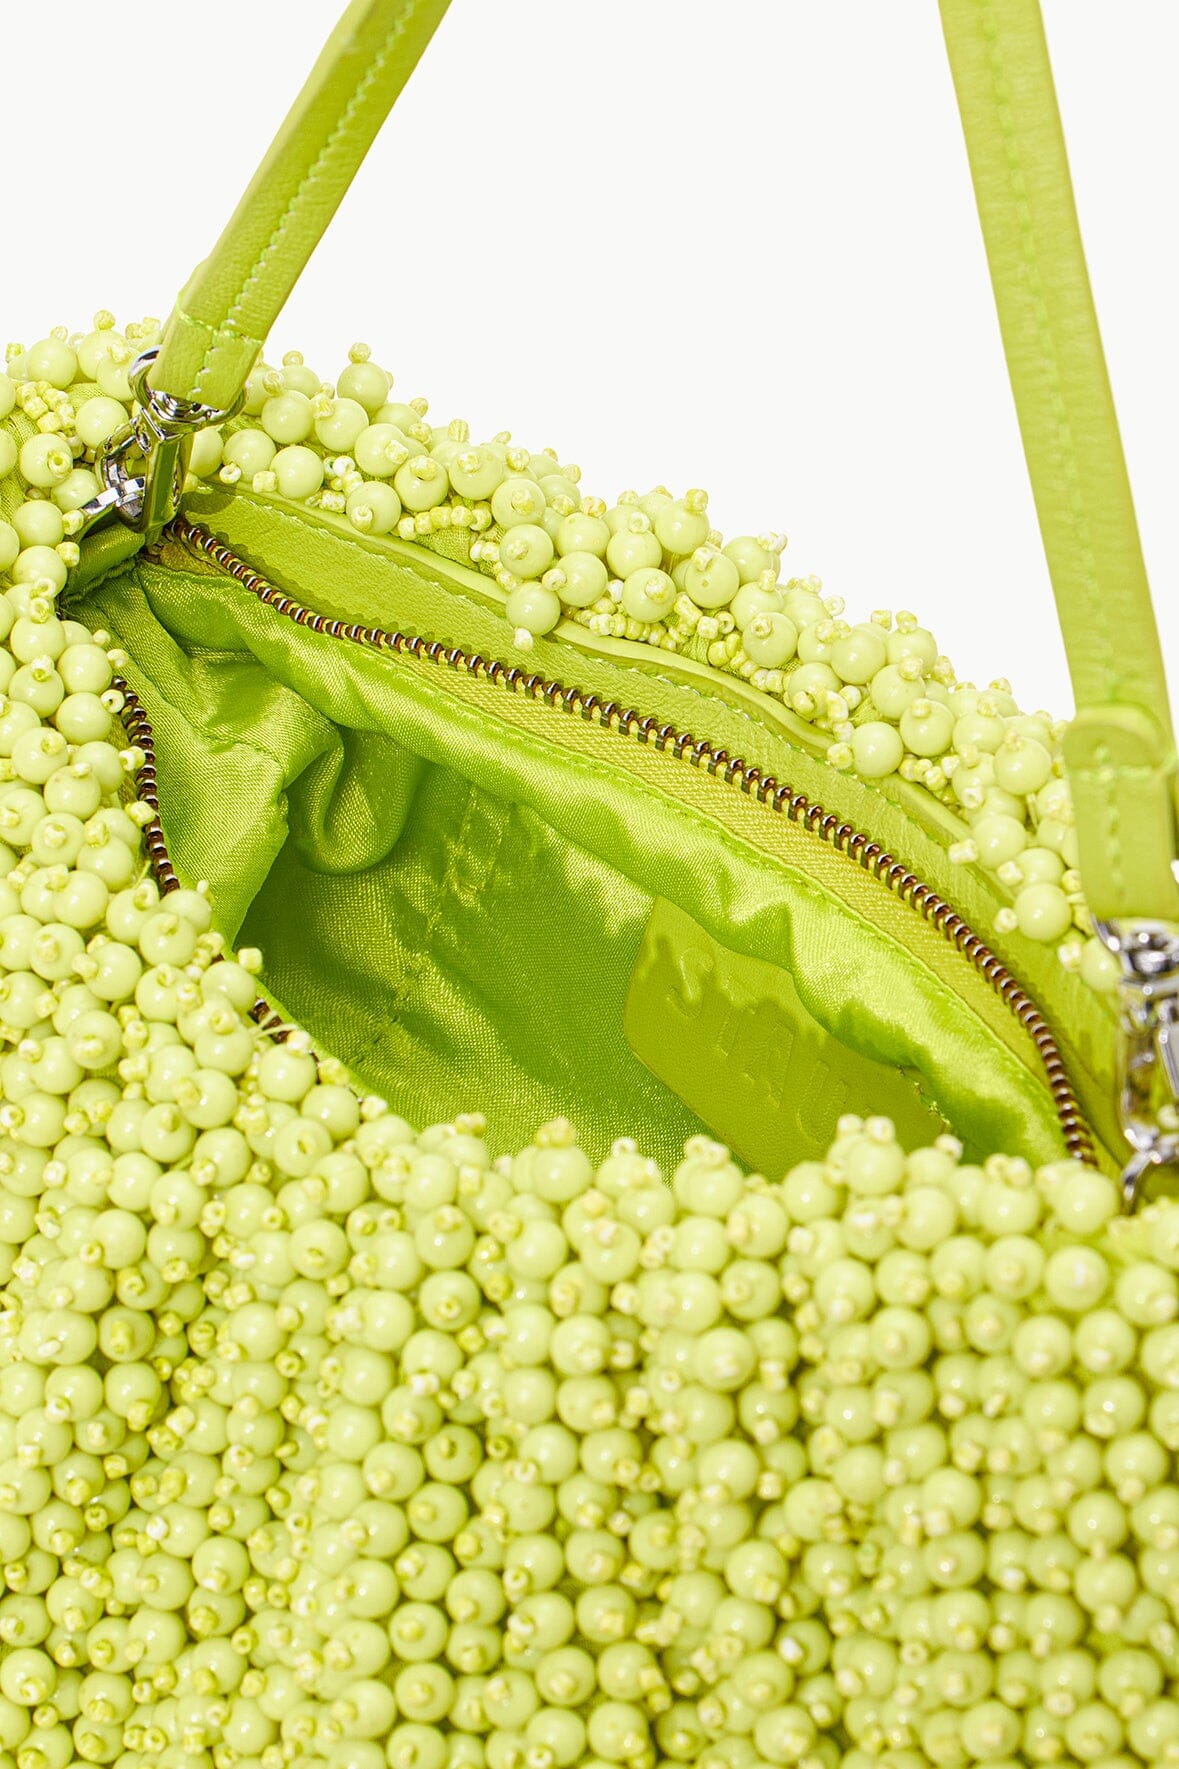 Staud Bean Convertible Patent Leather Shoulder Bag In Citron